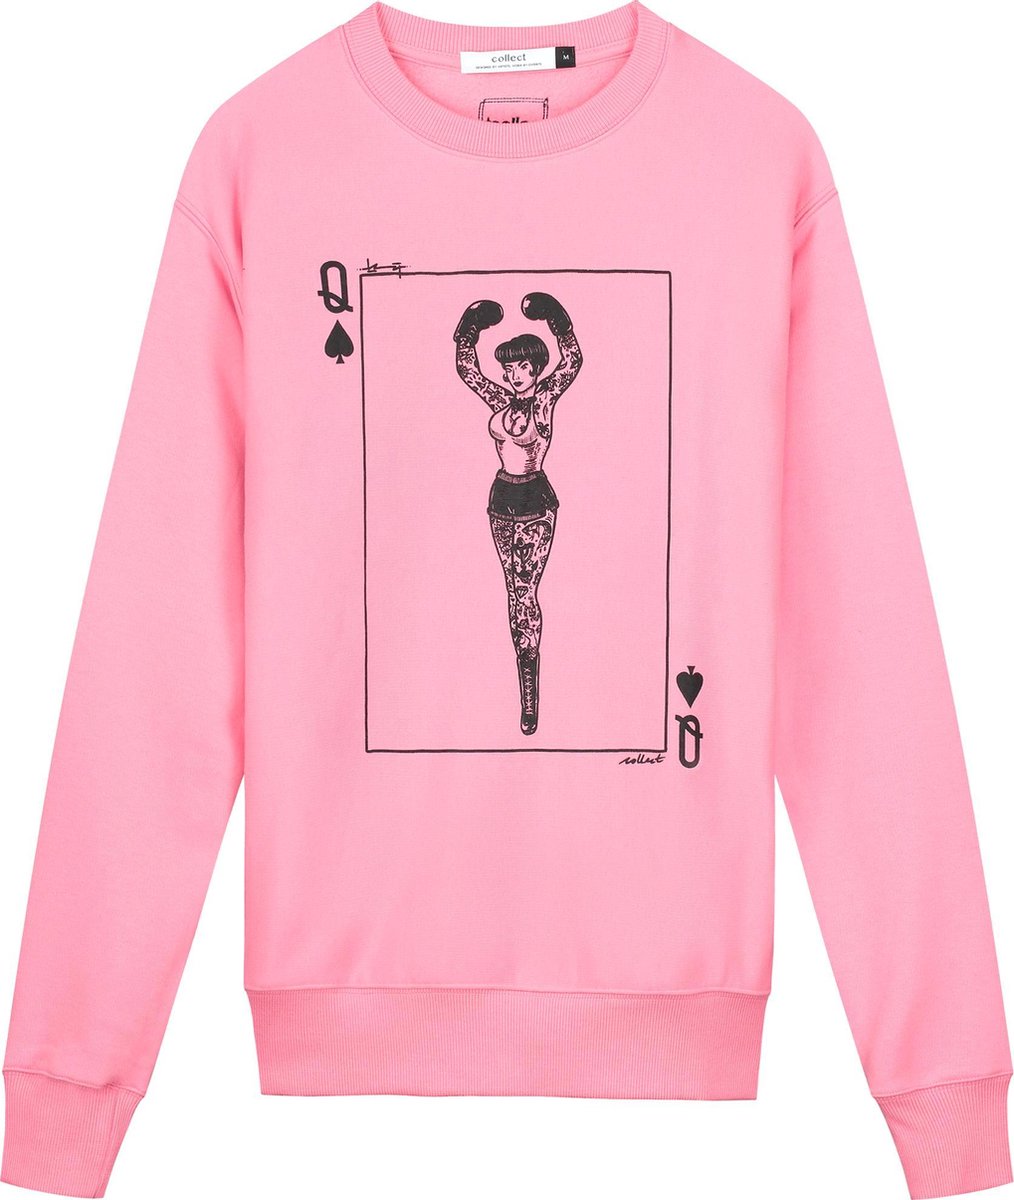 Collect The Label - Hippe Trui - Boxing Queen Sweater - Roze - Unisex - XXL